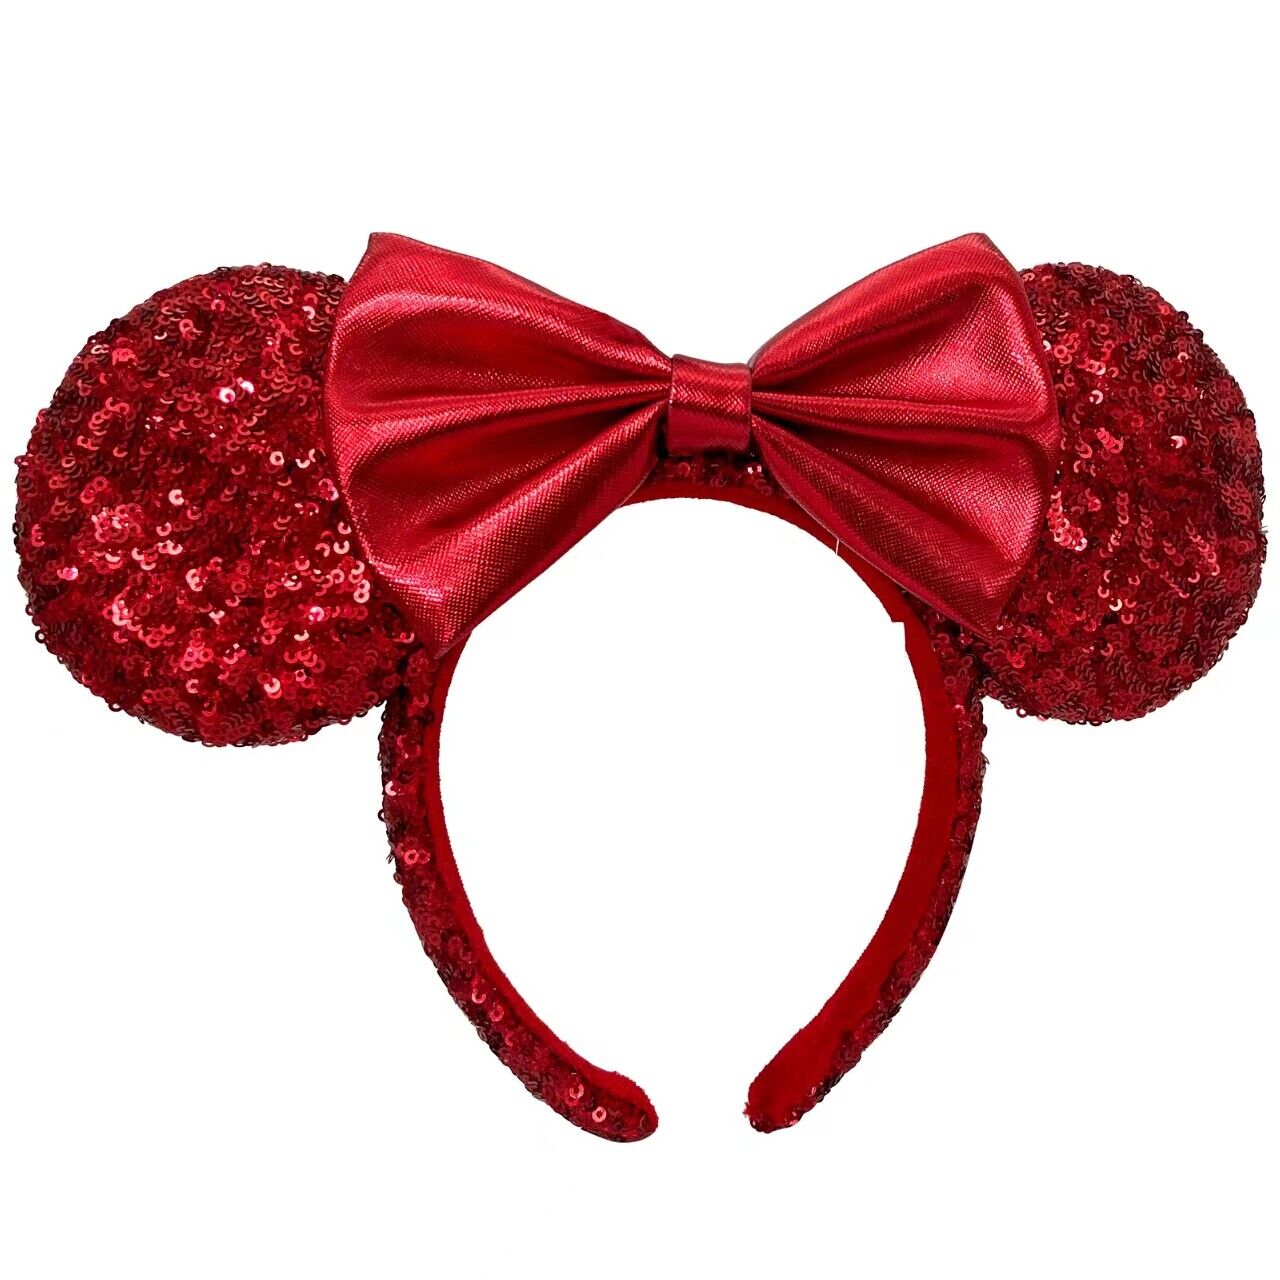 Red Sequin Bow Redd Pirate Disney Parks Ears Mickey Mouse Minnie Ears Headband